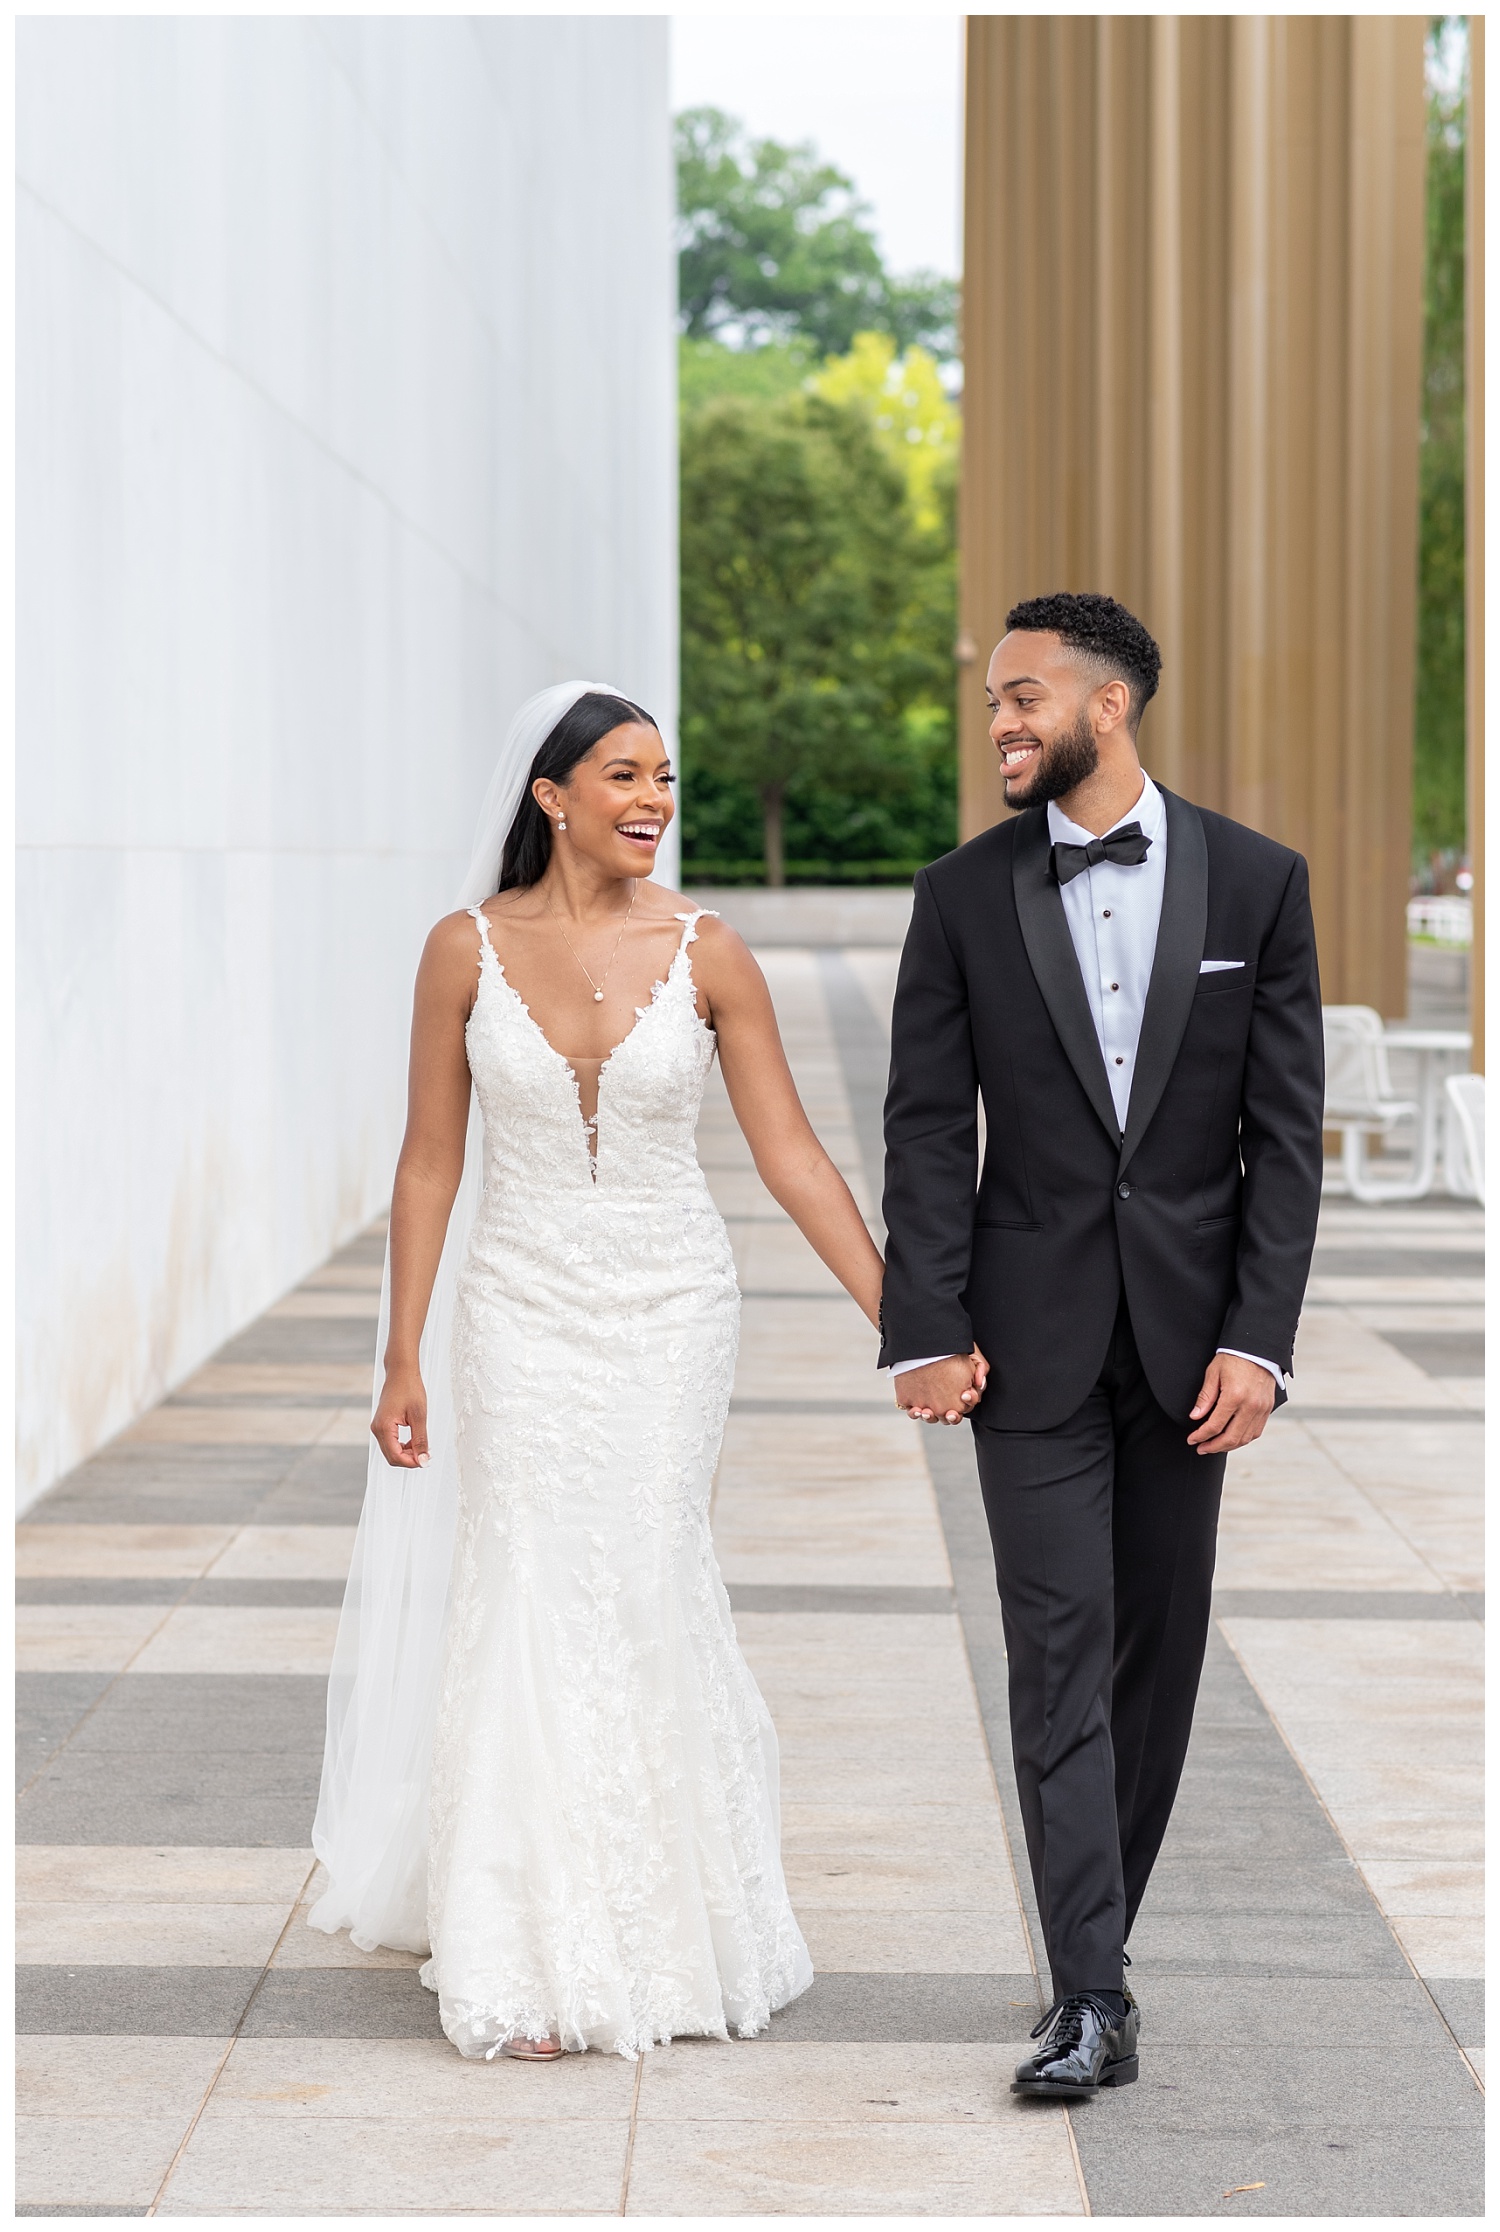 wedding couple holding hands and walking together in Washington, D.C.